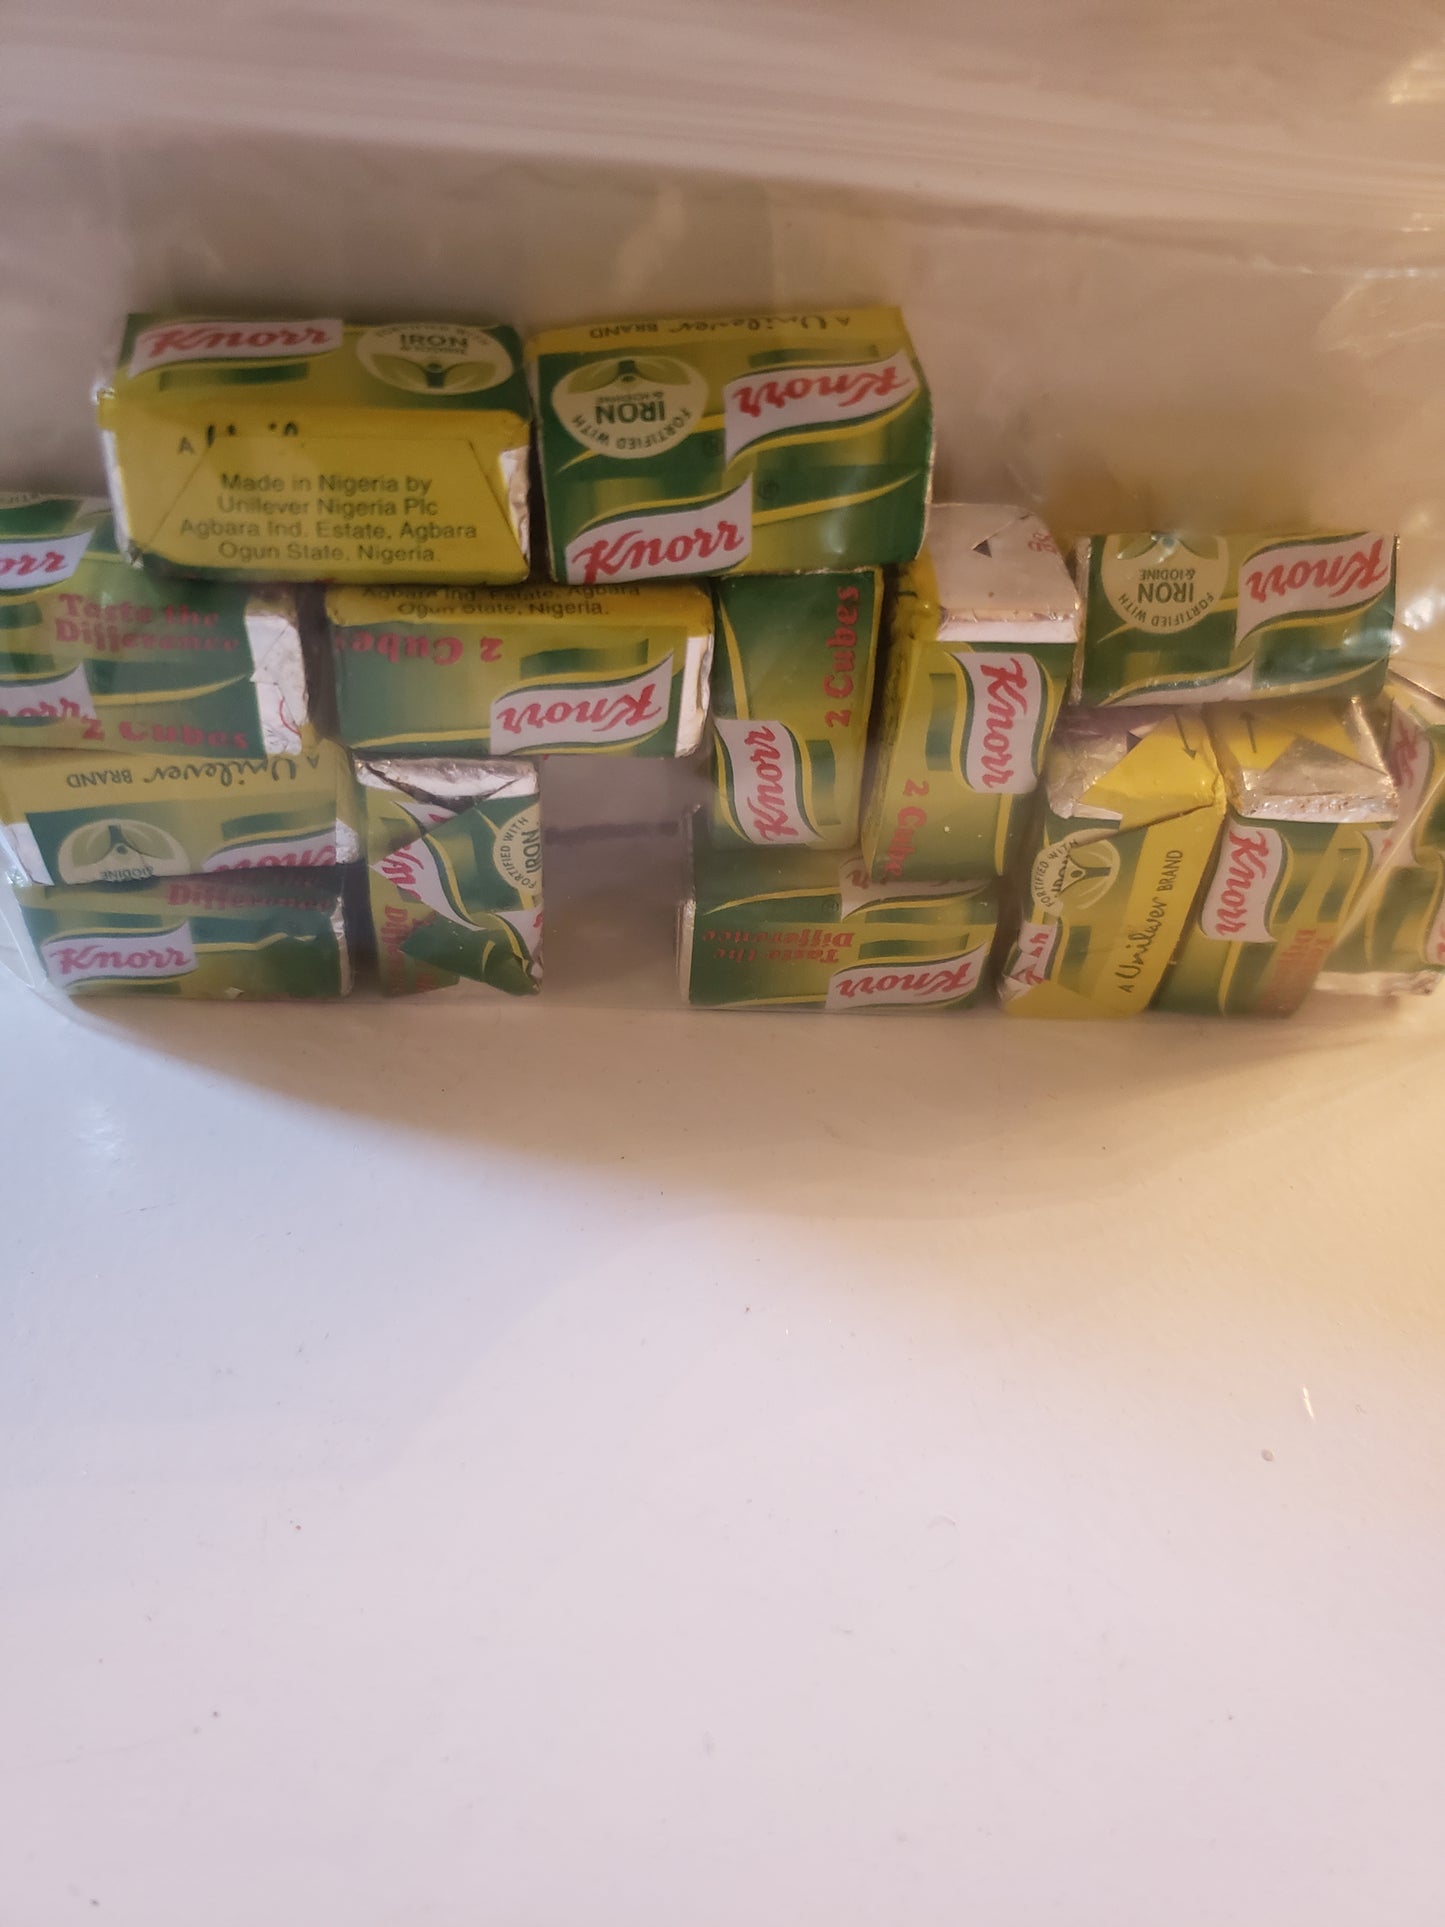 Knorr beef in small packs